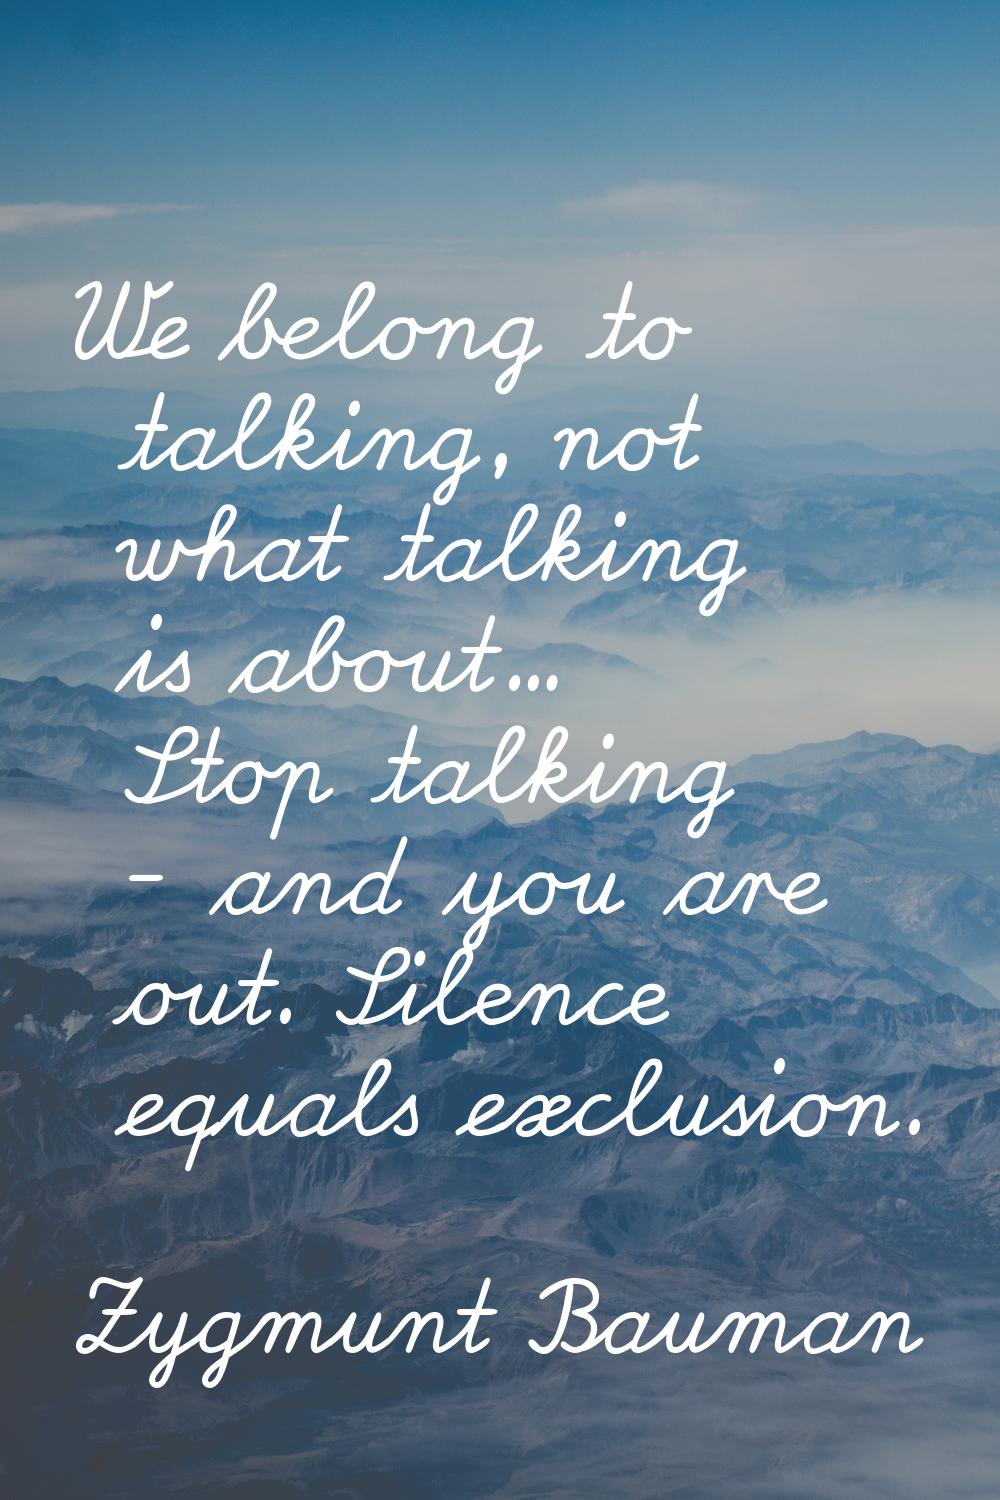 We belong to talking, not what talking is about... Stop talking - and you are out. Silence equals e